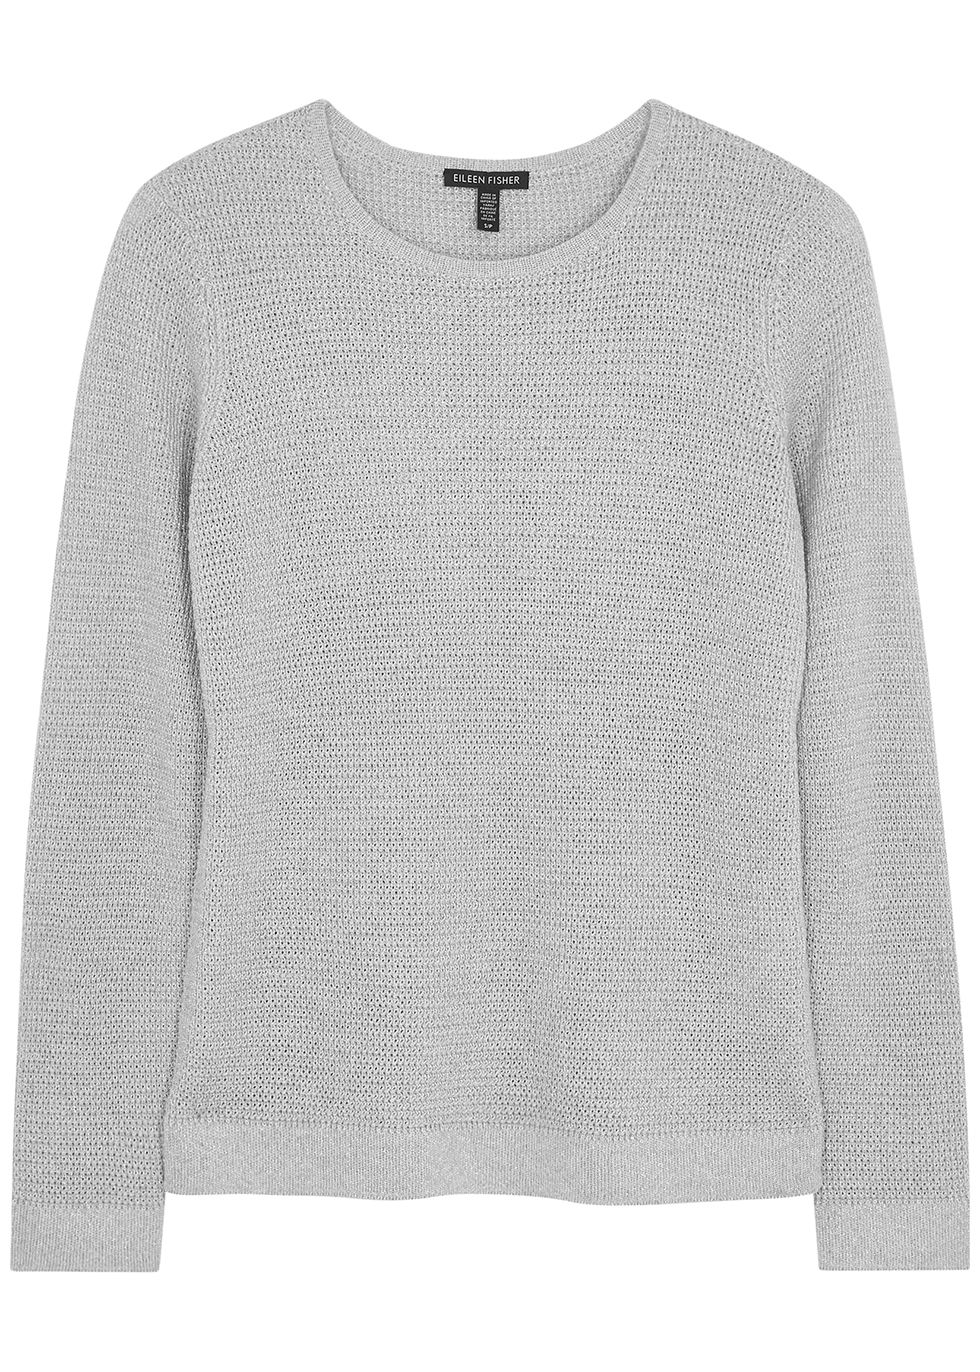 Eileen Fisher Sweater Size Chart